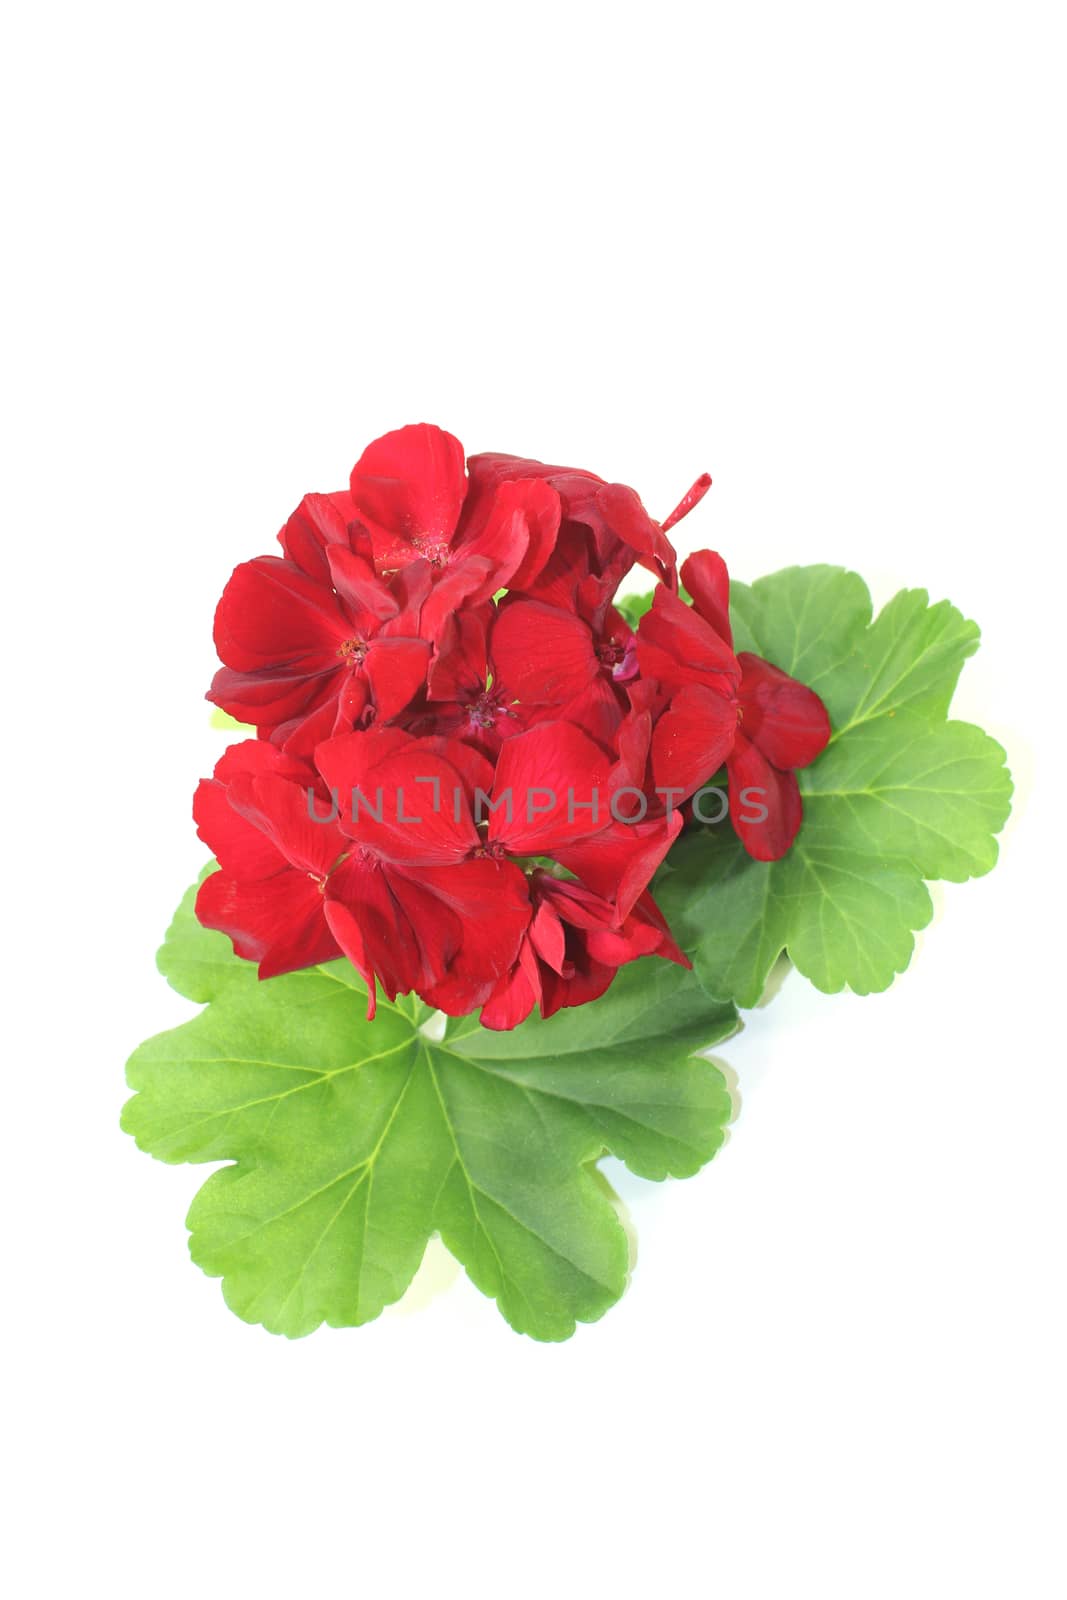 red Pelargonium with petals on a light background